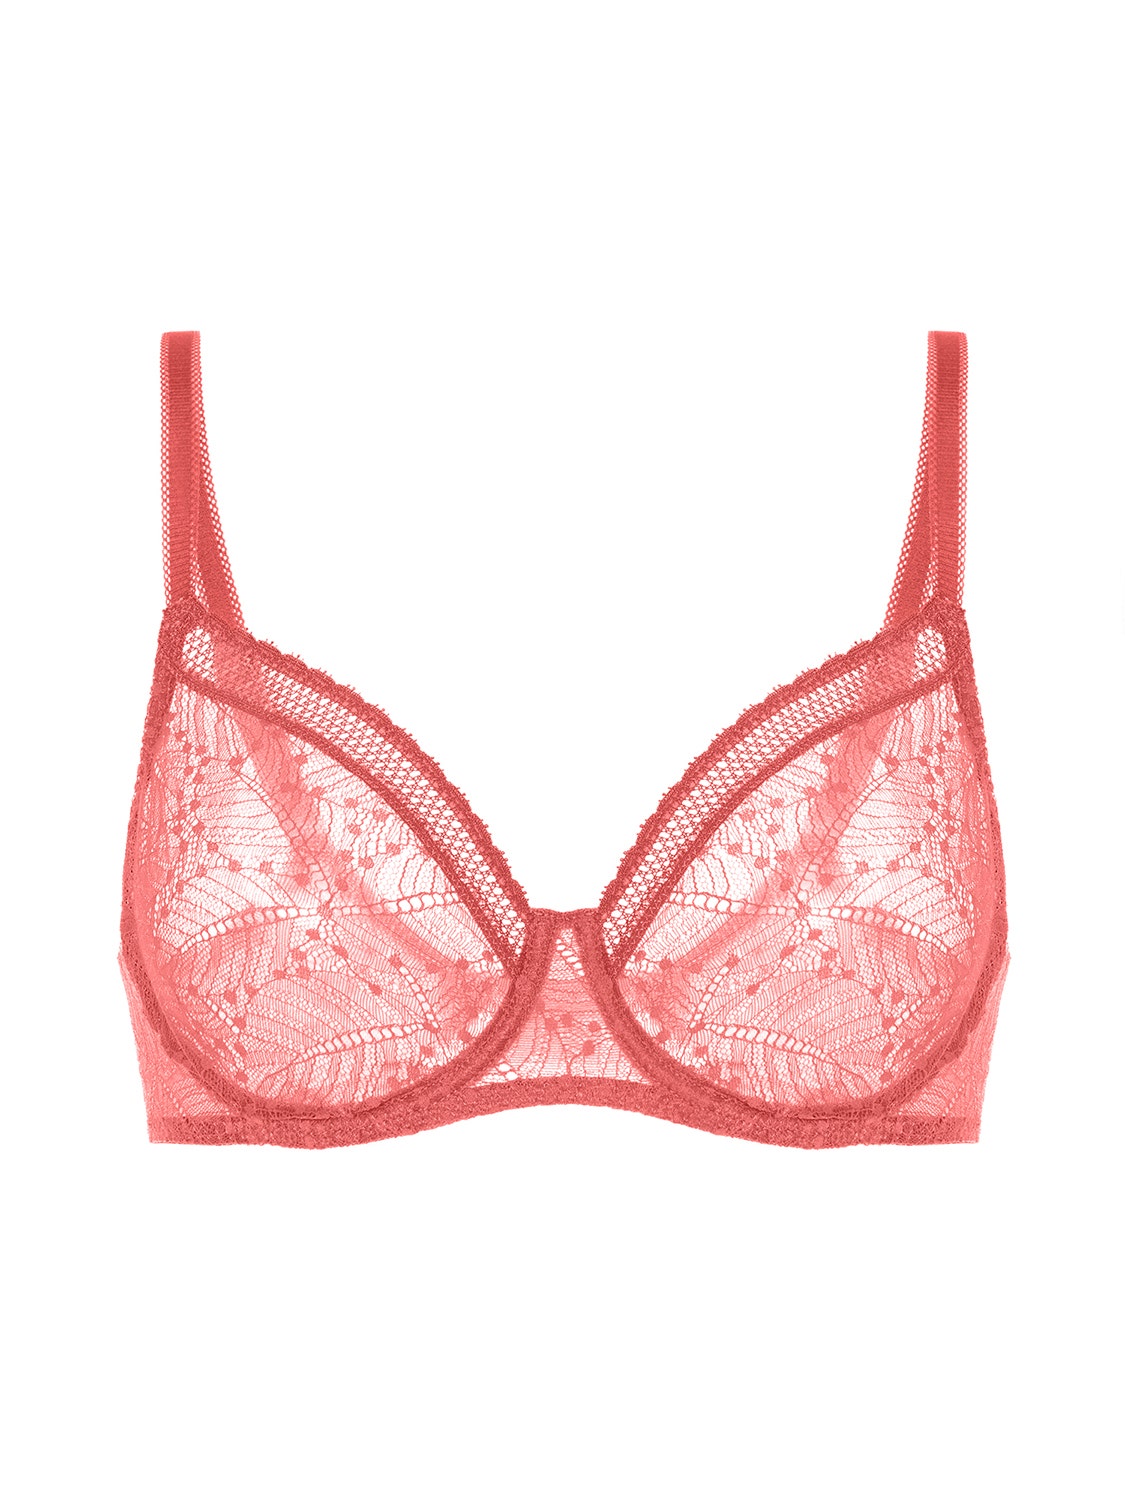 plunging-moulded-underwired-bra-texas-pink-comete-40